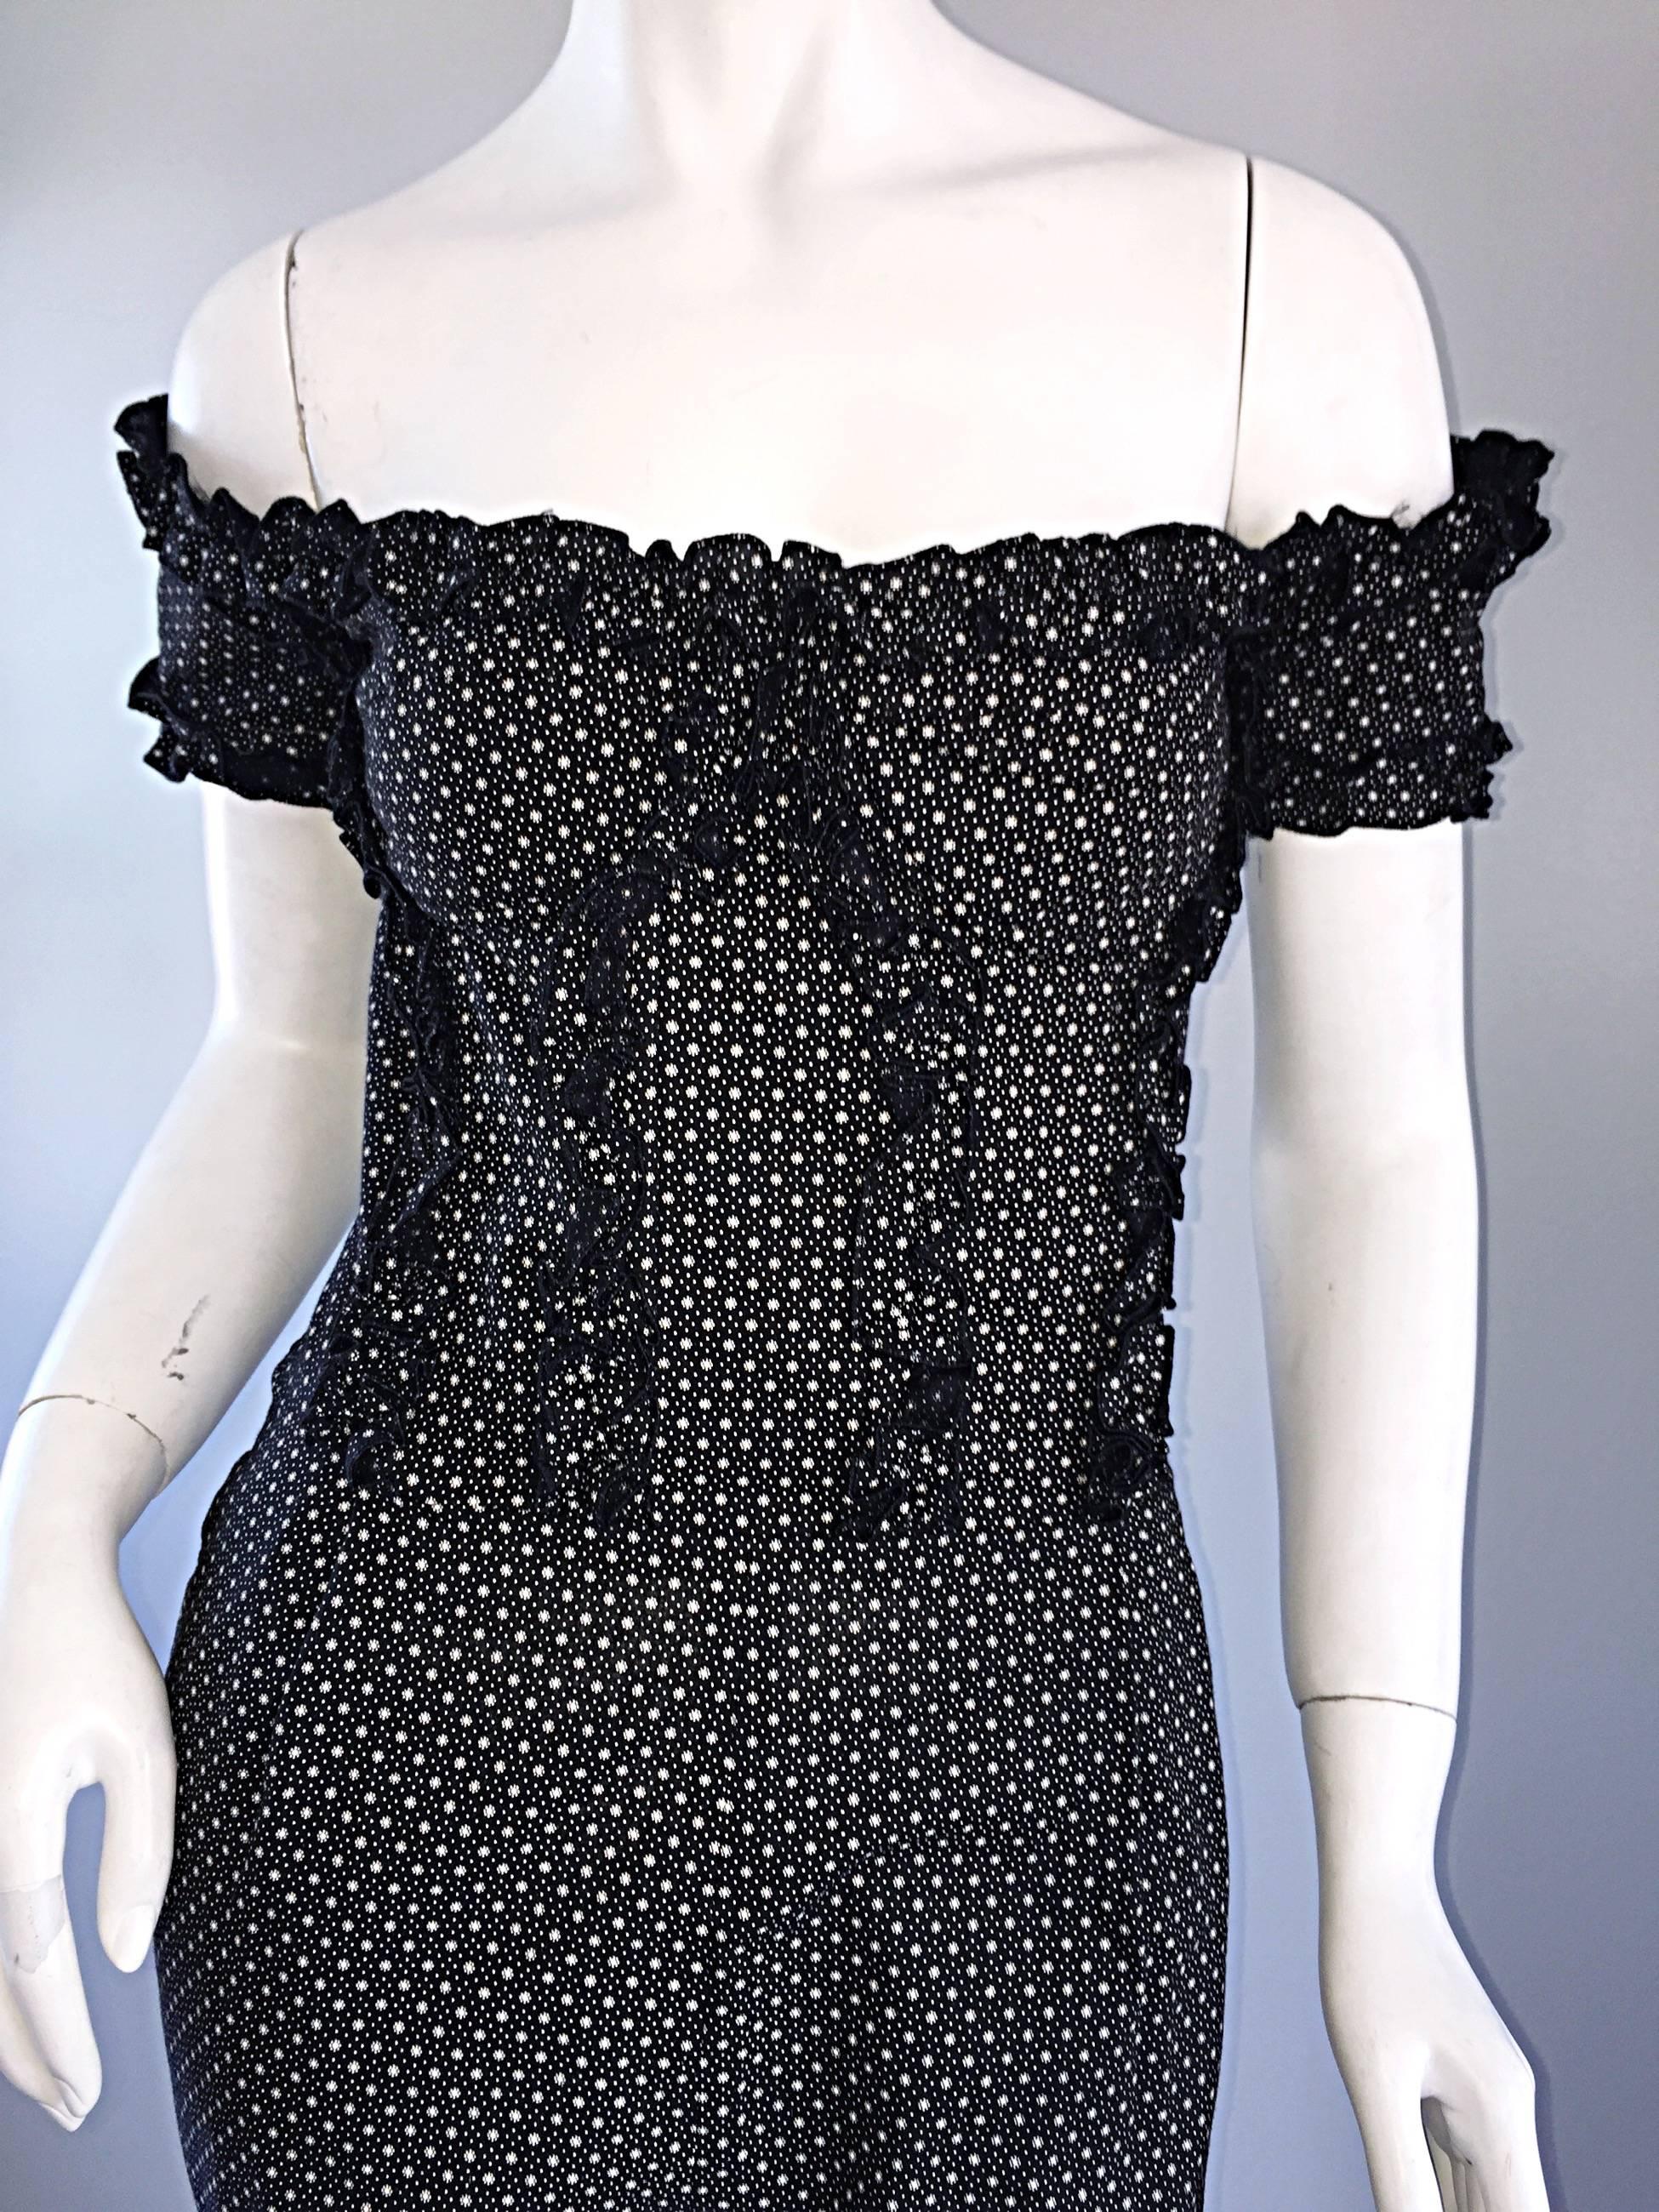 Vintage Brioini 1980s Ruffled Corset Cropped Polka Dot Jumpsuit Onesie  For Sale 1